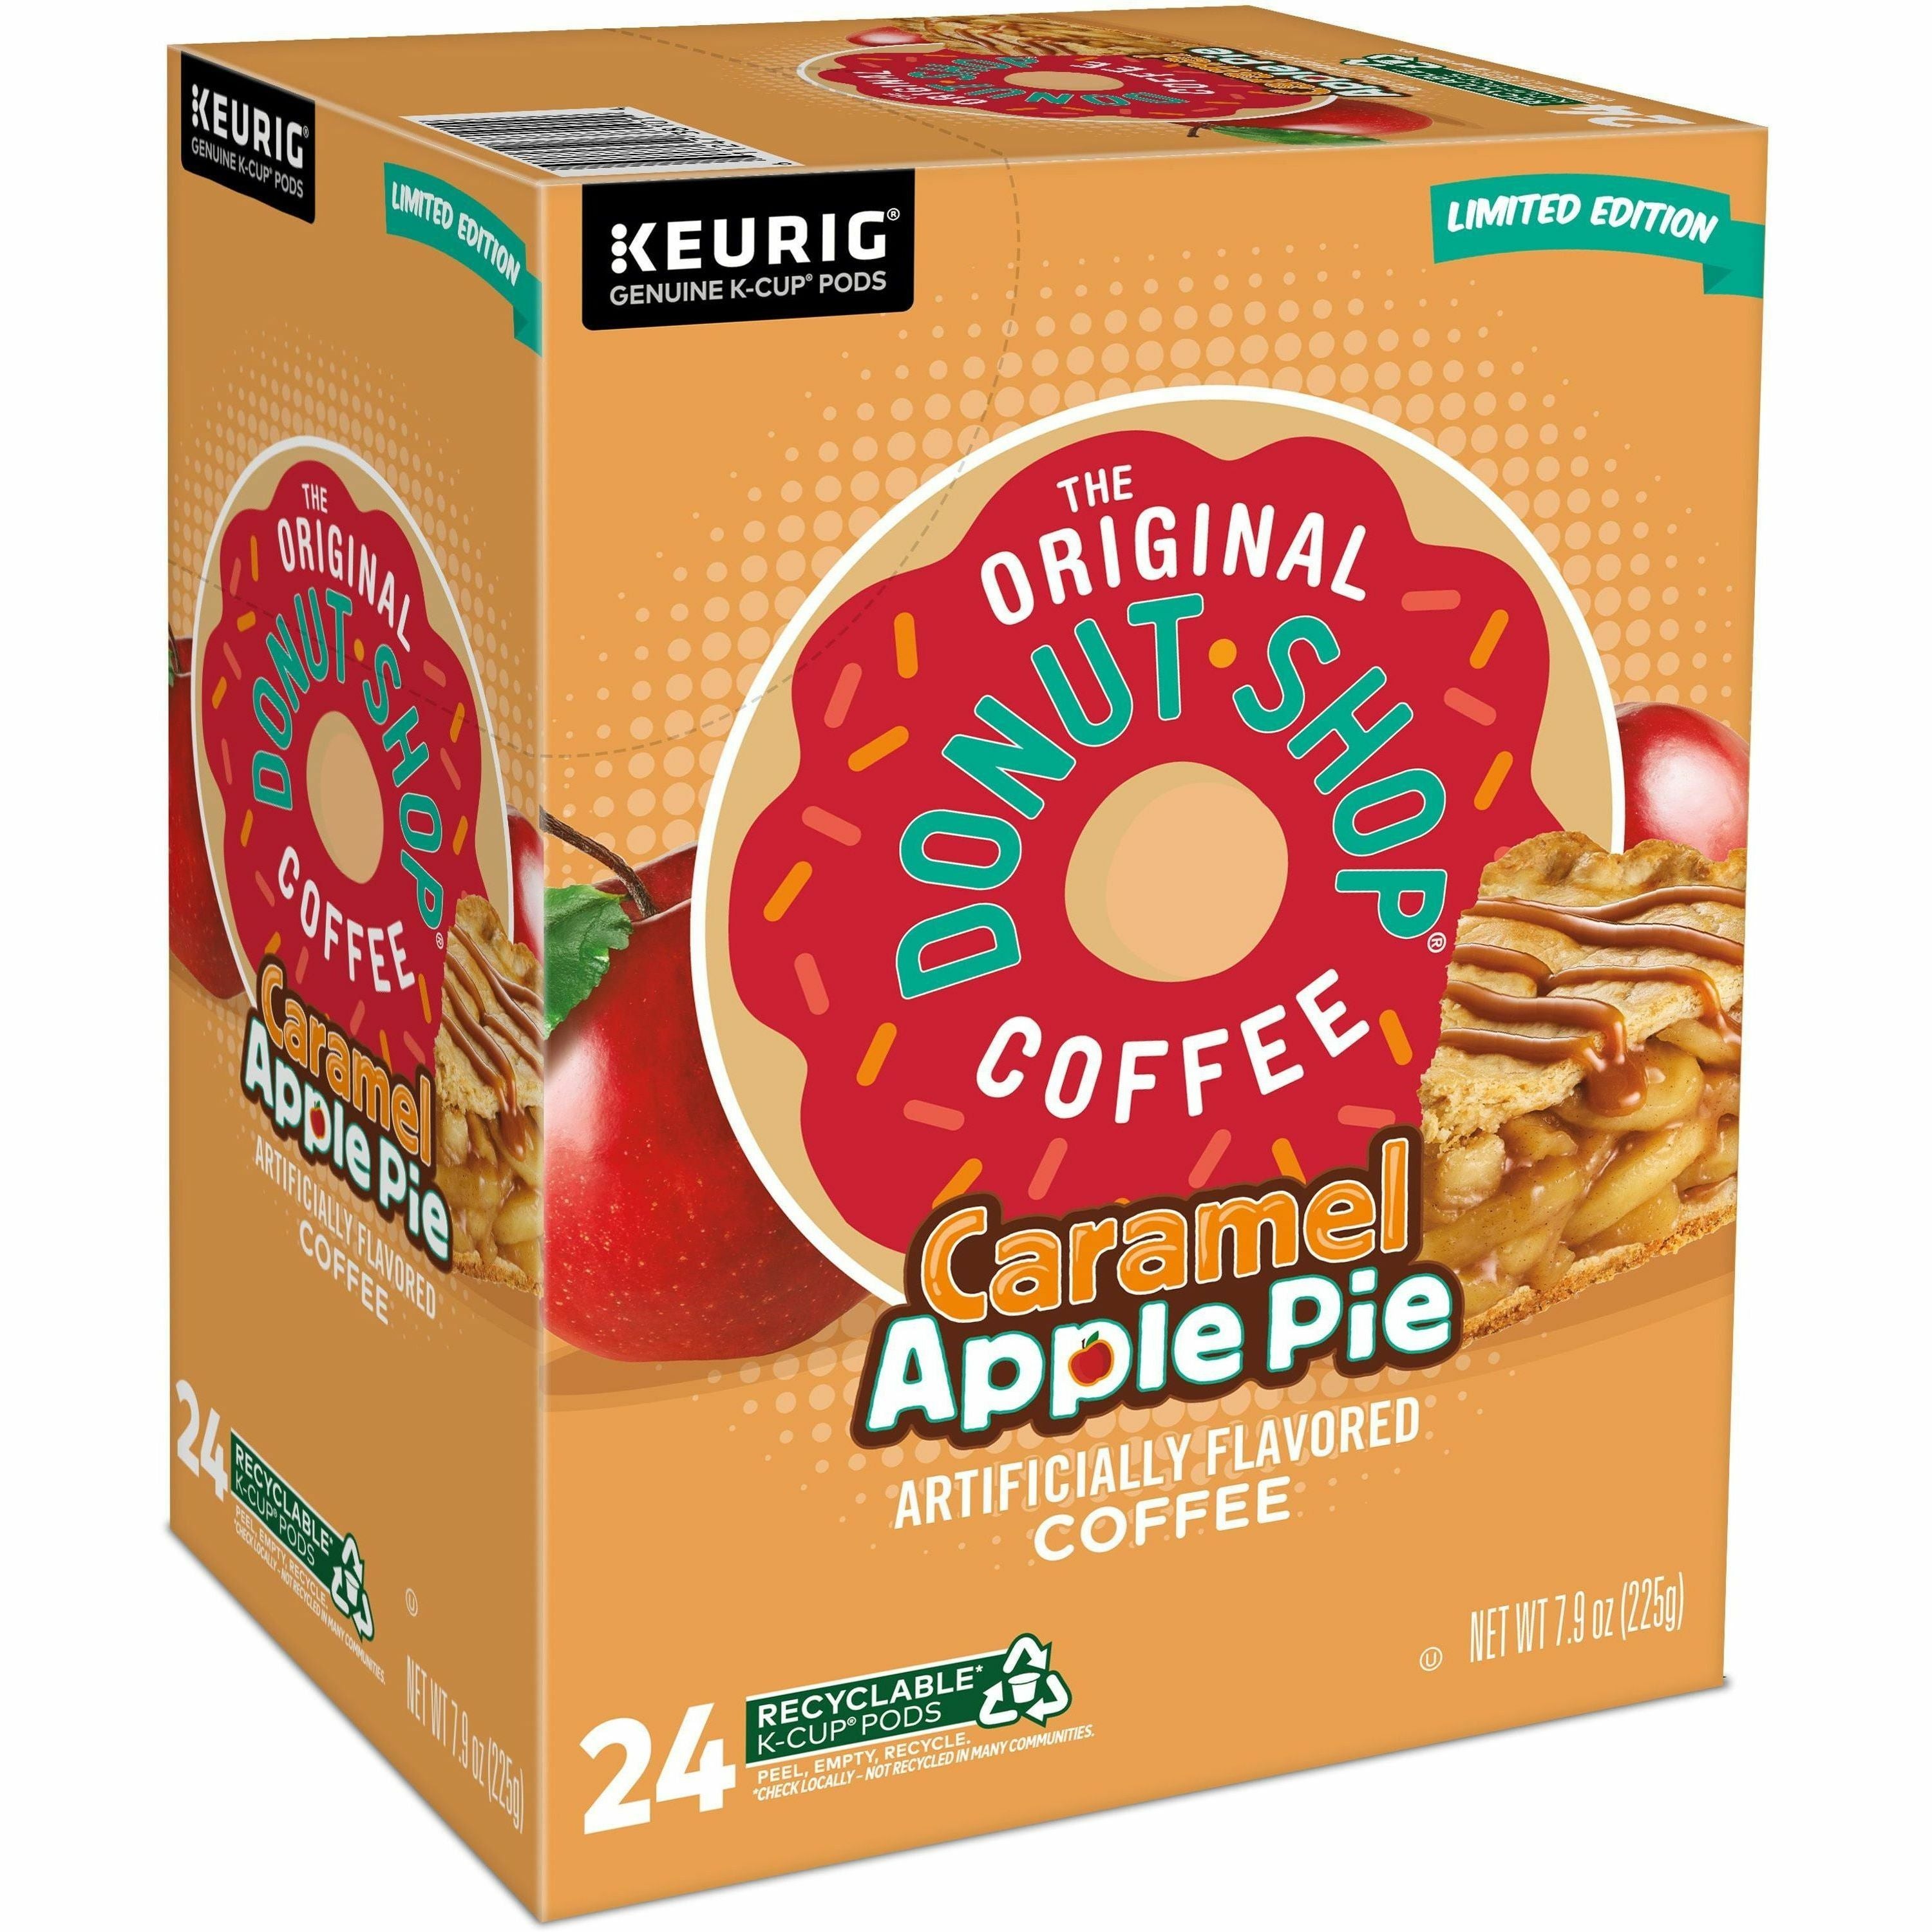 donut-shop-k-cup-caramel-apple-pie-coffee-compatible-with-keurig-brewer-light-24-box_gmt8101 - 5